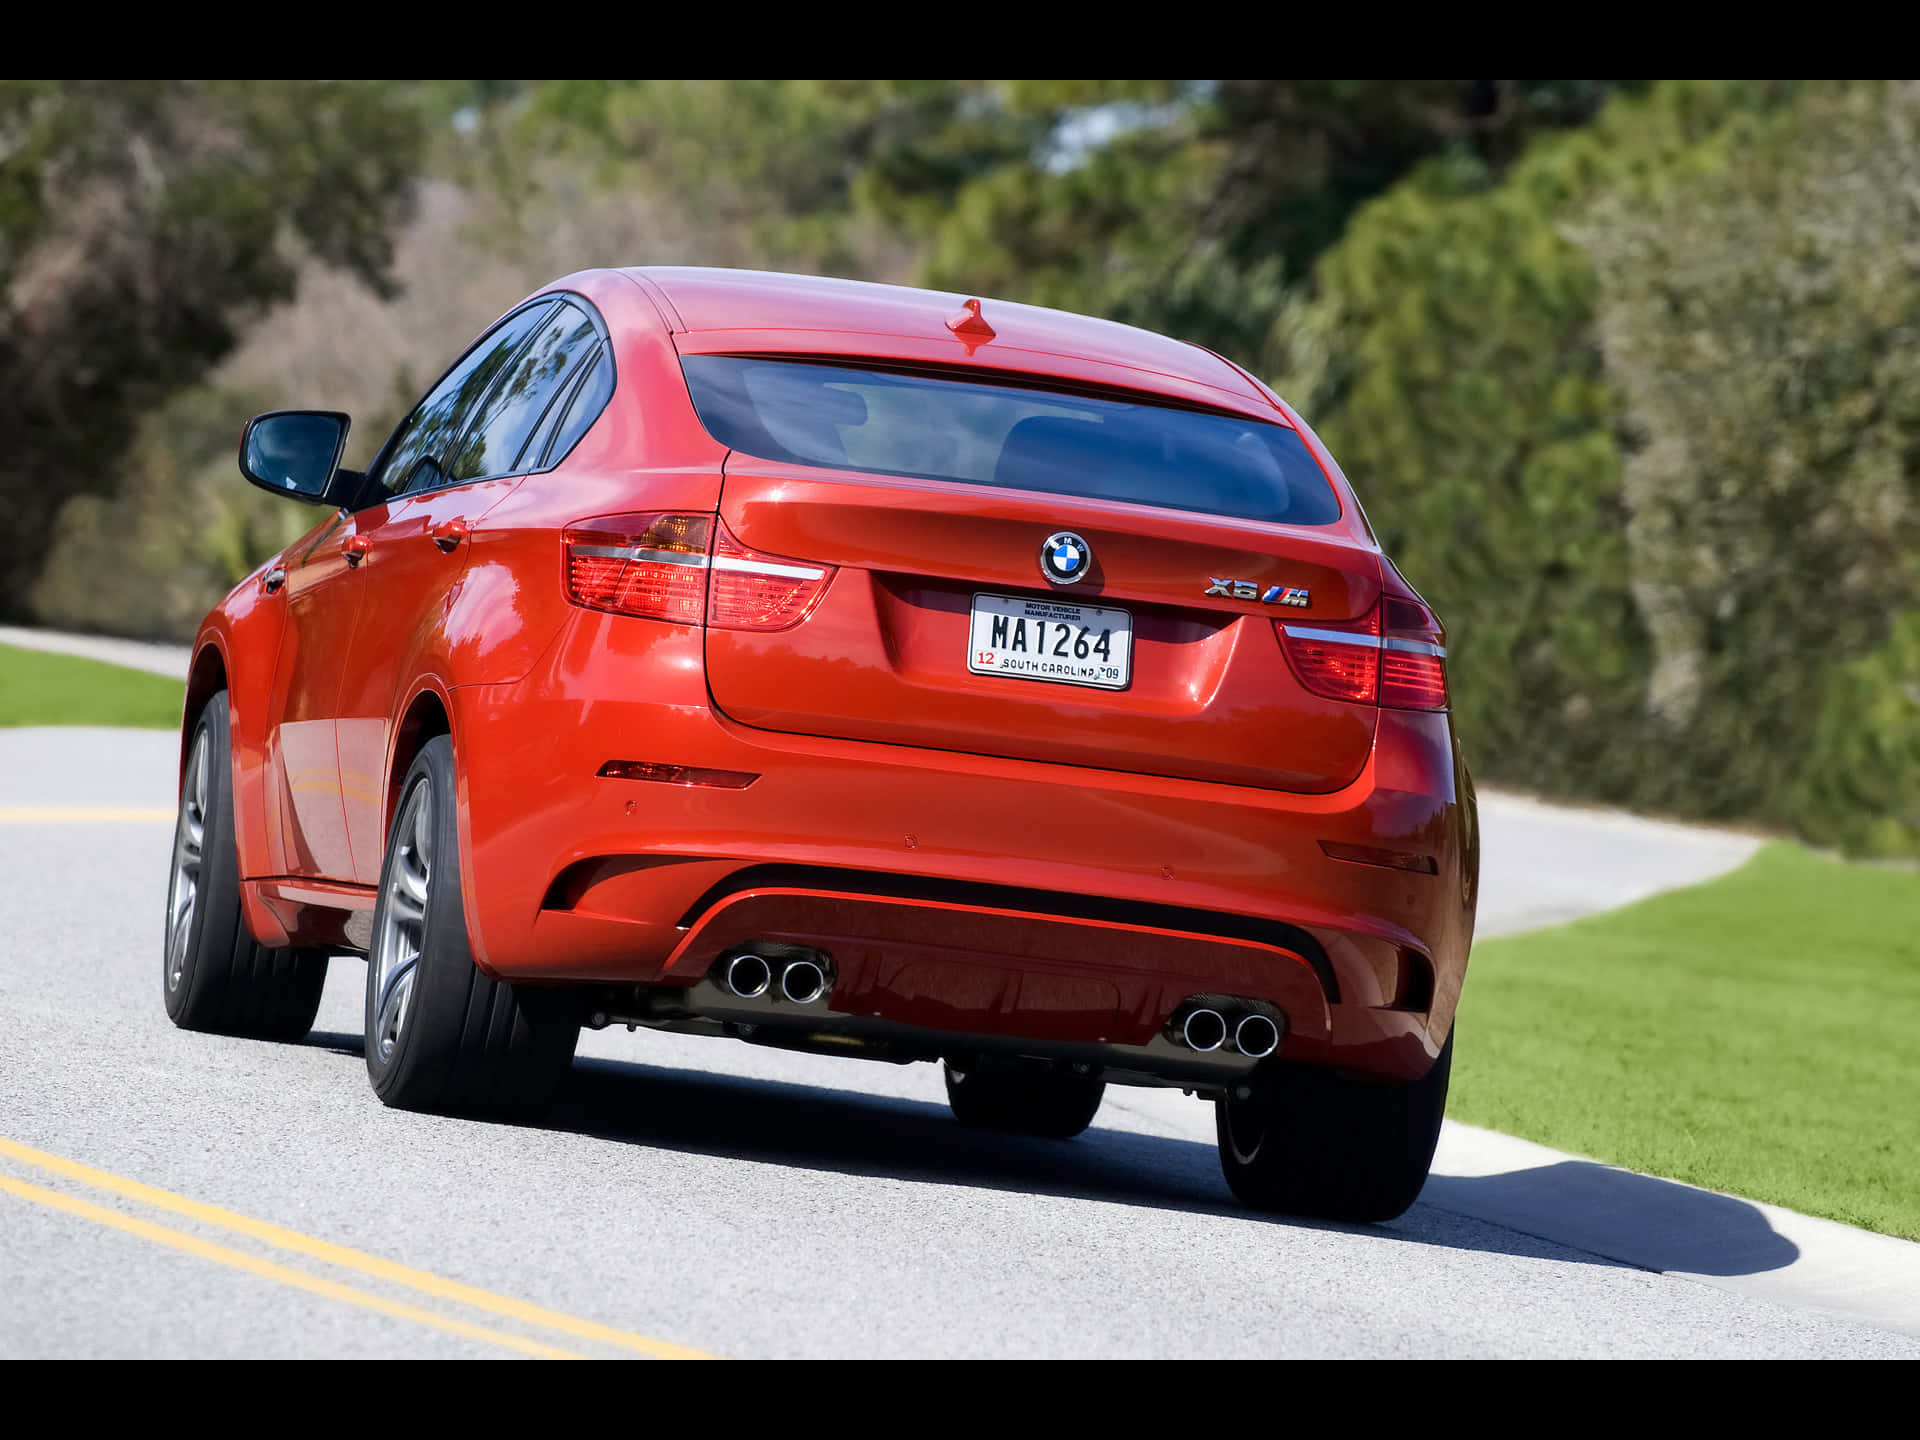 The Iconic BMW X6 M: A Powerful Force On the Road